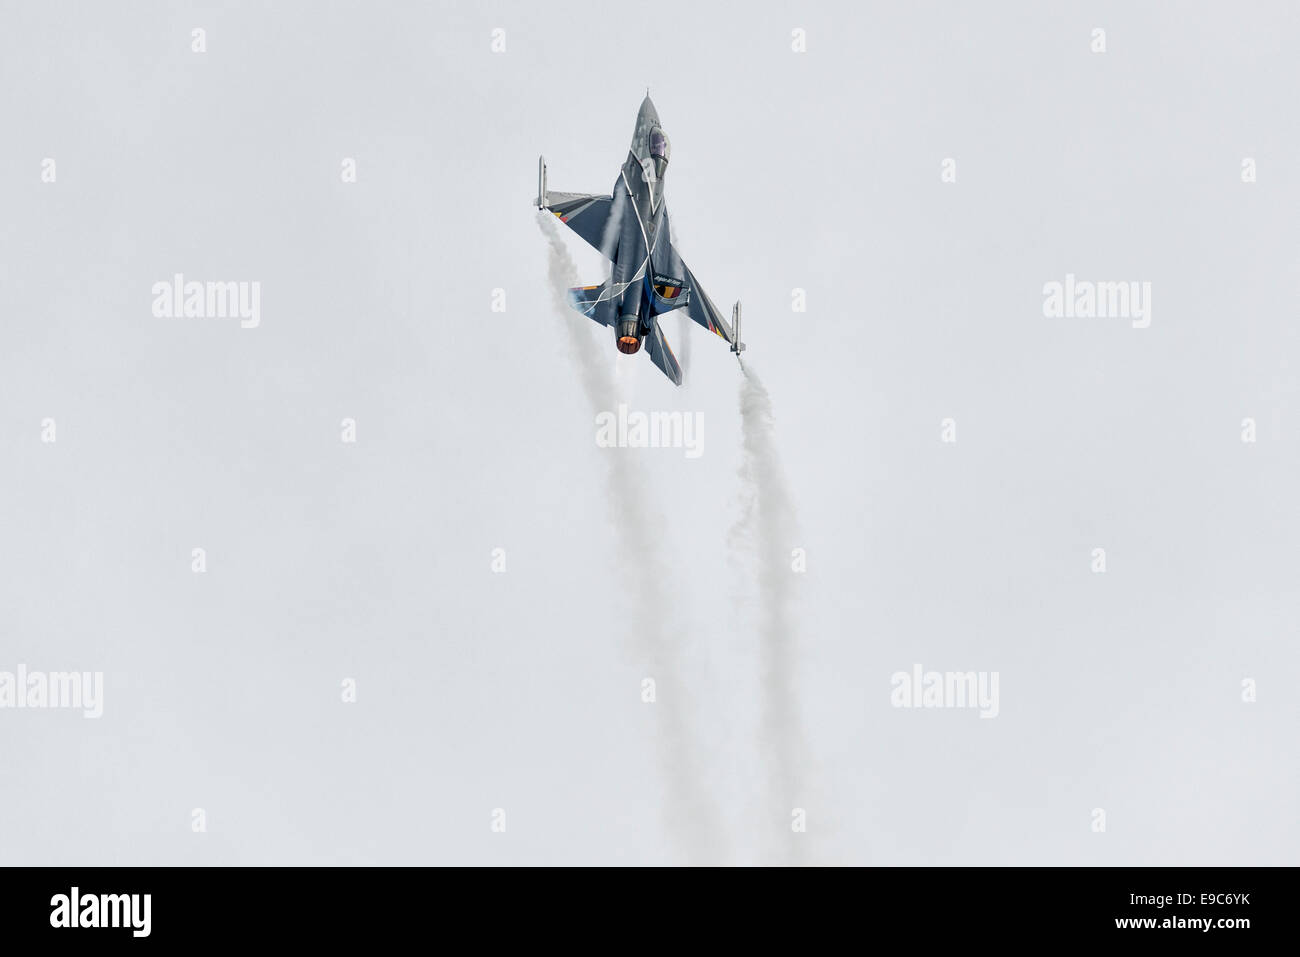 A General Dynamics F-16A Fighting Falcon Military Jet Fighter of 350 Squadron Belgium Air Force puts on an impressive display. Stock Photo